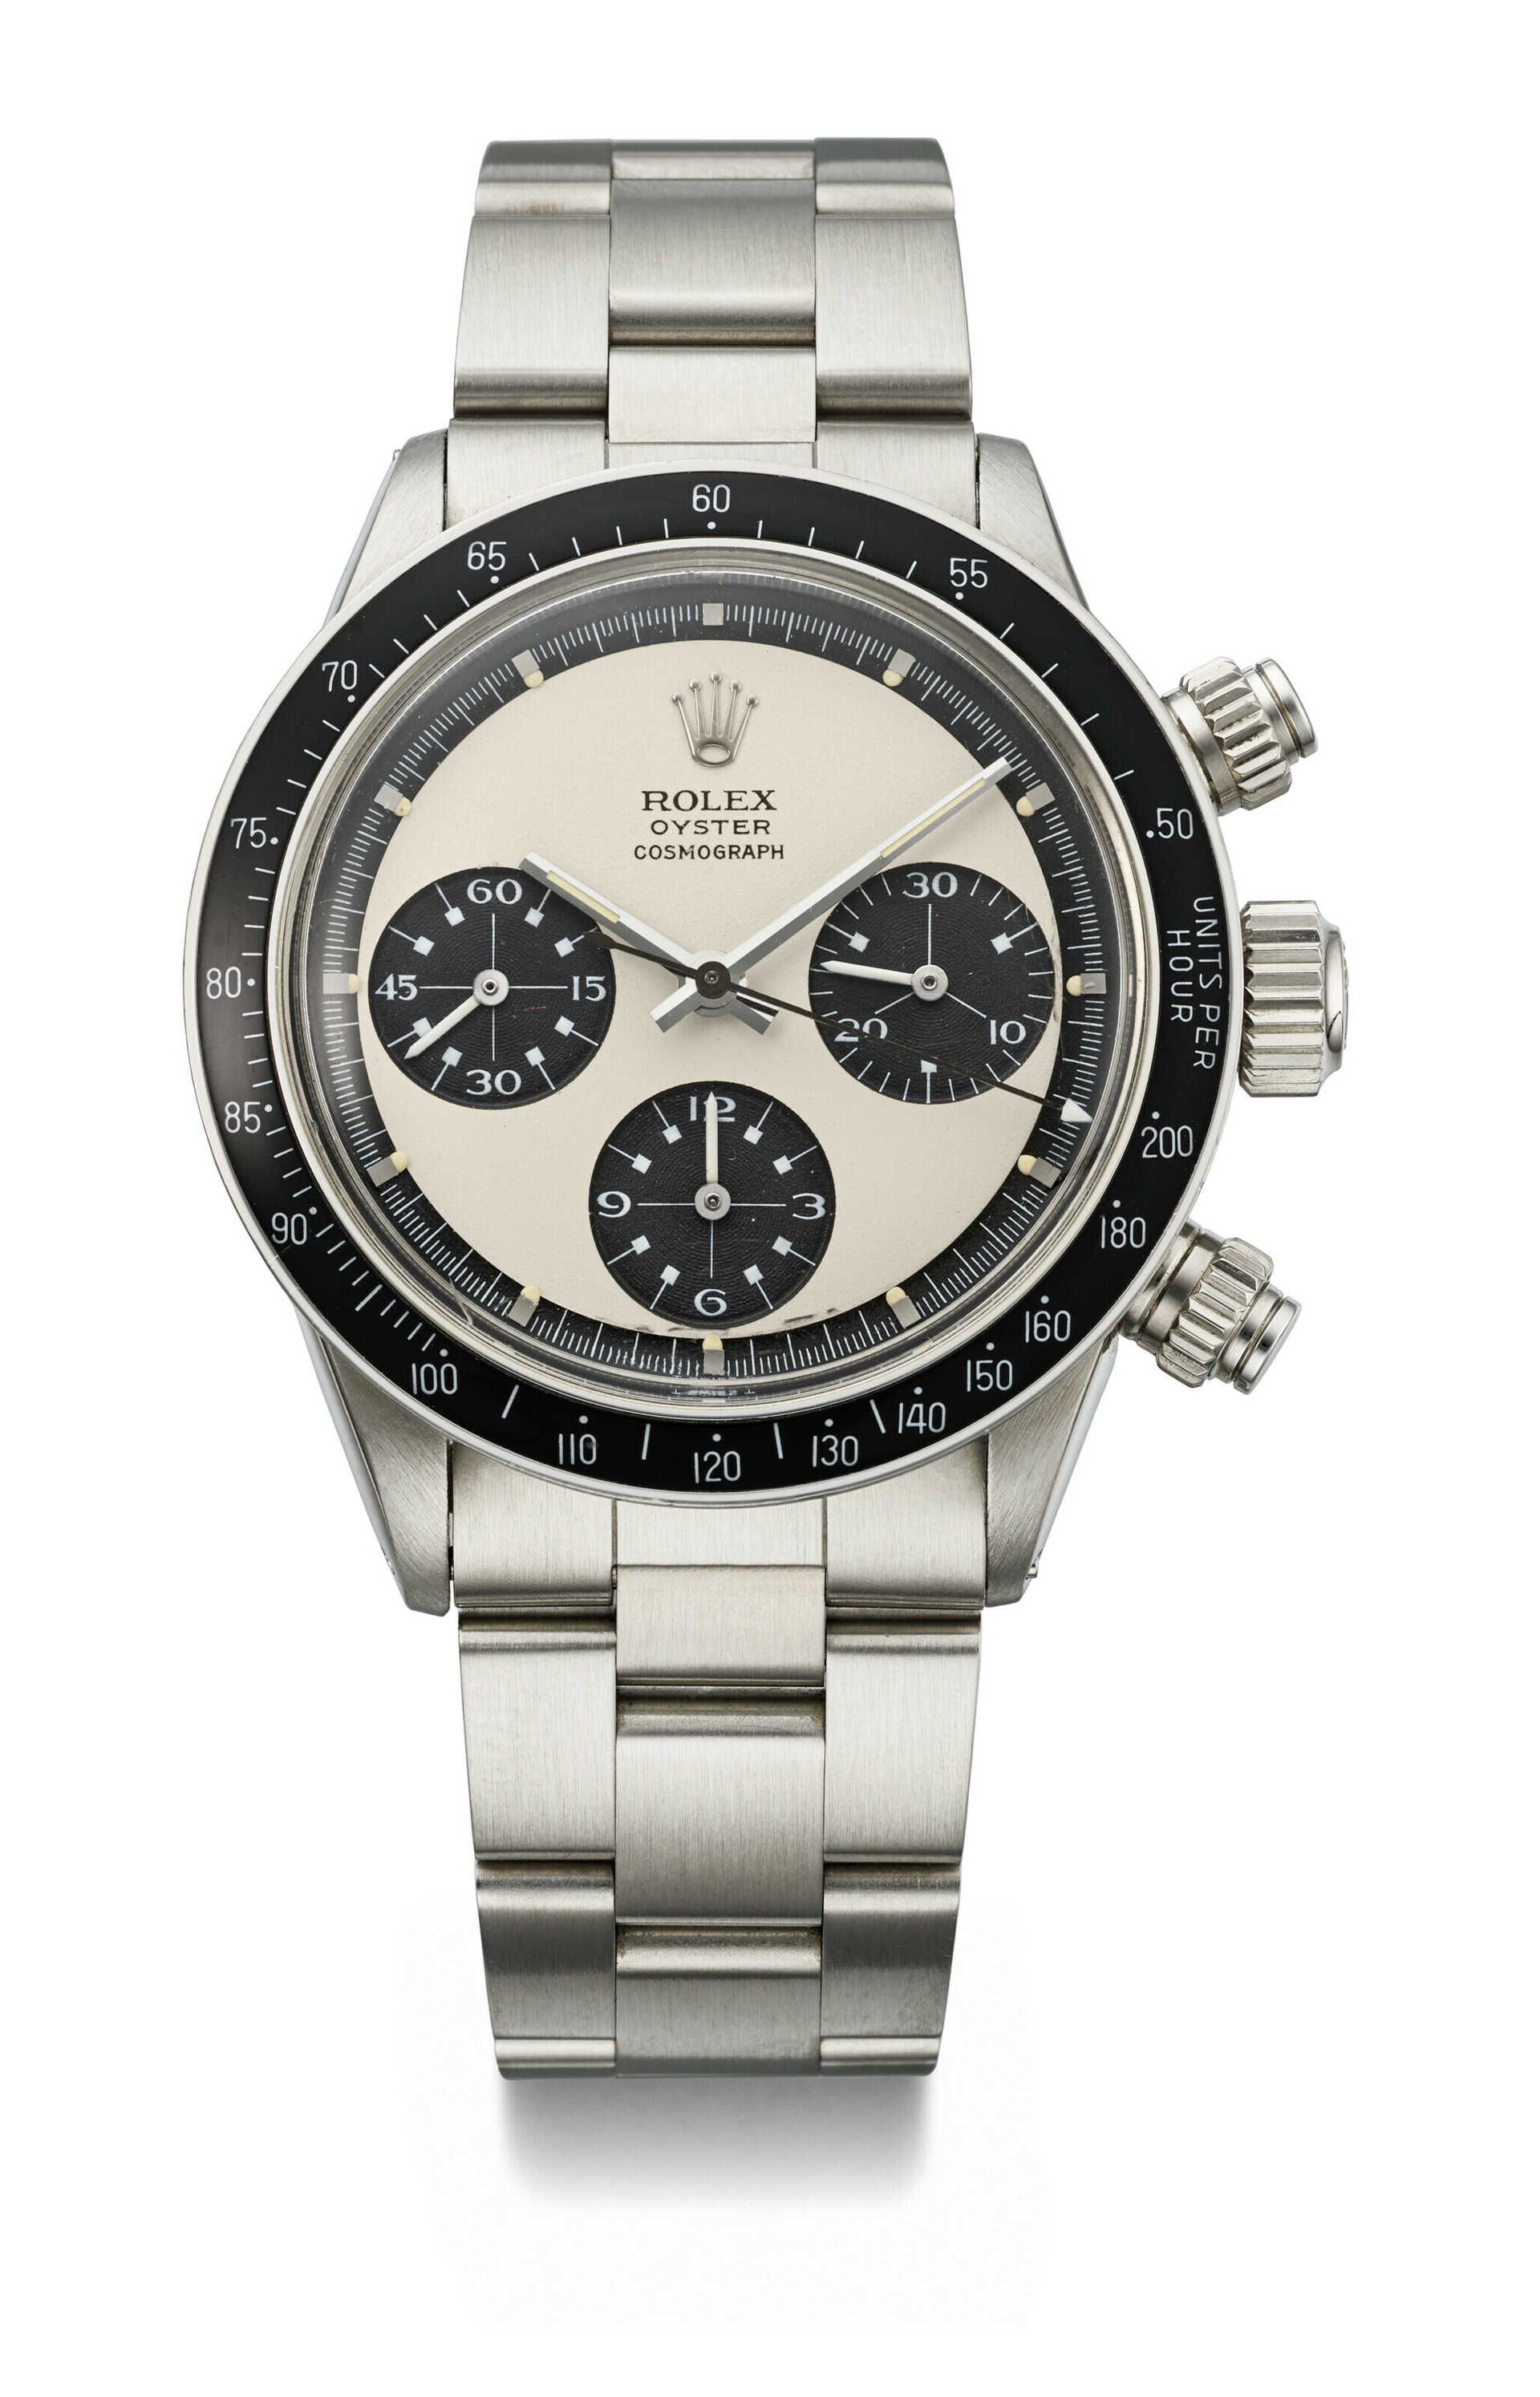 ROLEX. AN EXCEPTIONAL AND VERY RARE STAINLESS STEEL CHRONOGRAPH WRISTWATCH WITH &#39;PAUL NEWMAN PANDA&#39; DIAL AND BRACELET